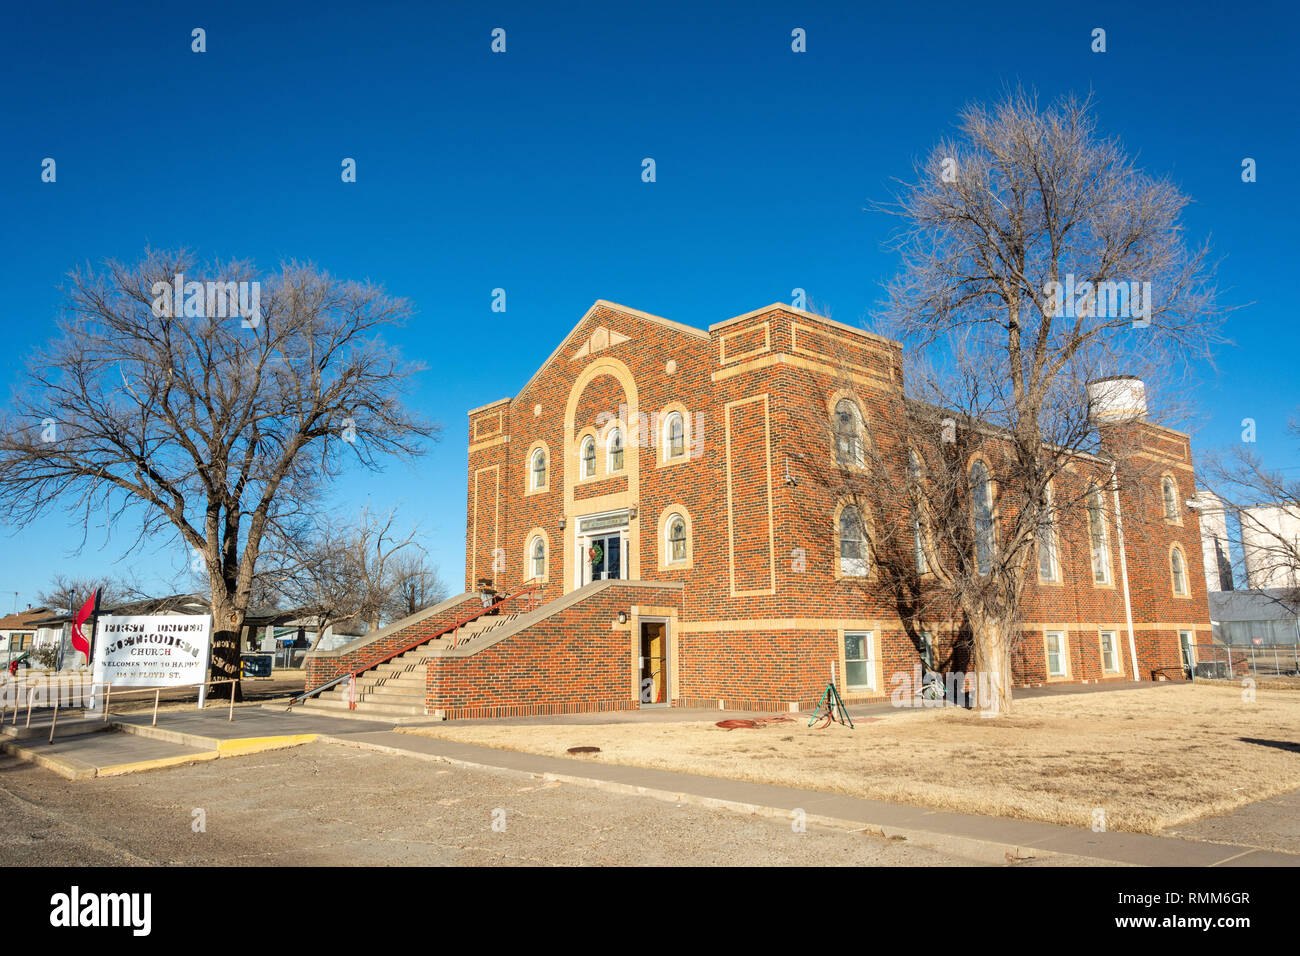 Happy, Texas, United States of America - January 1, 2017. Exterior view of the First United Methodist Church in Happy, TX. Stock Photo